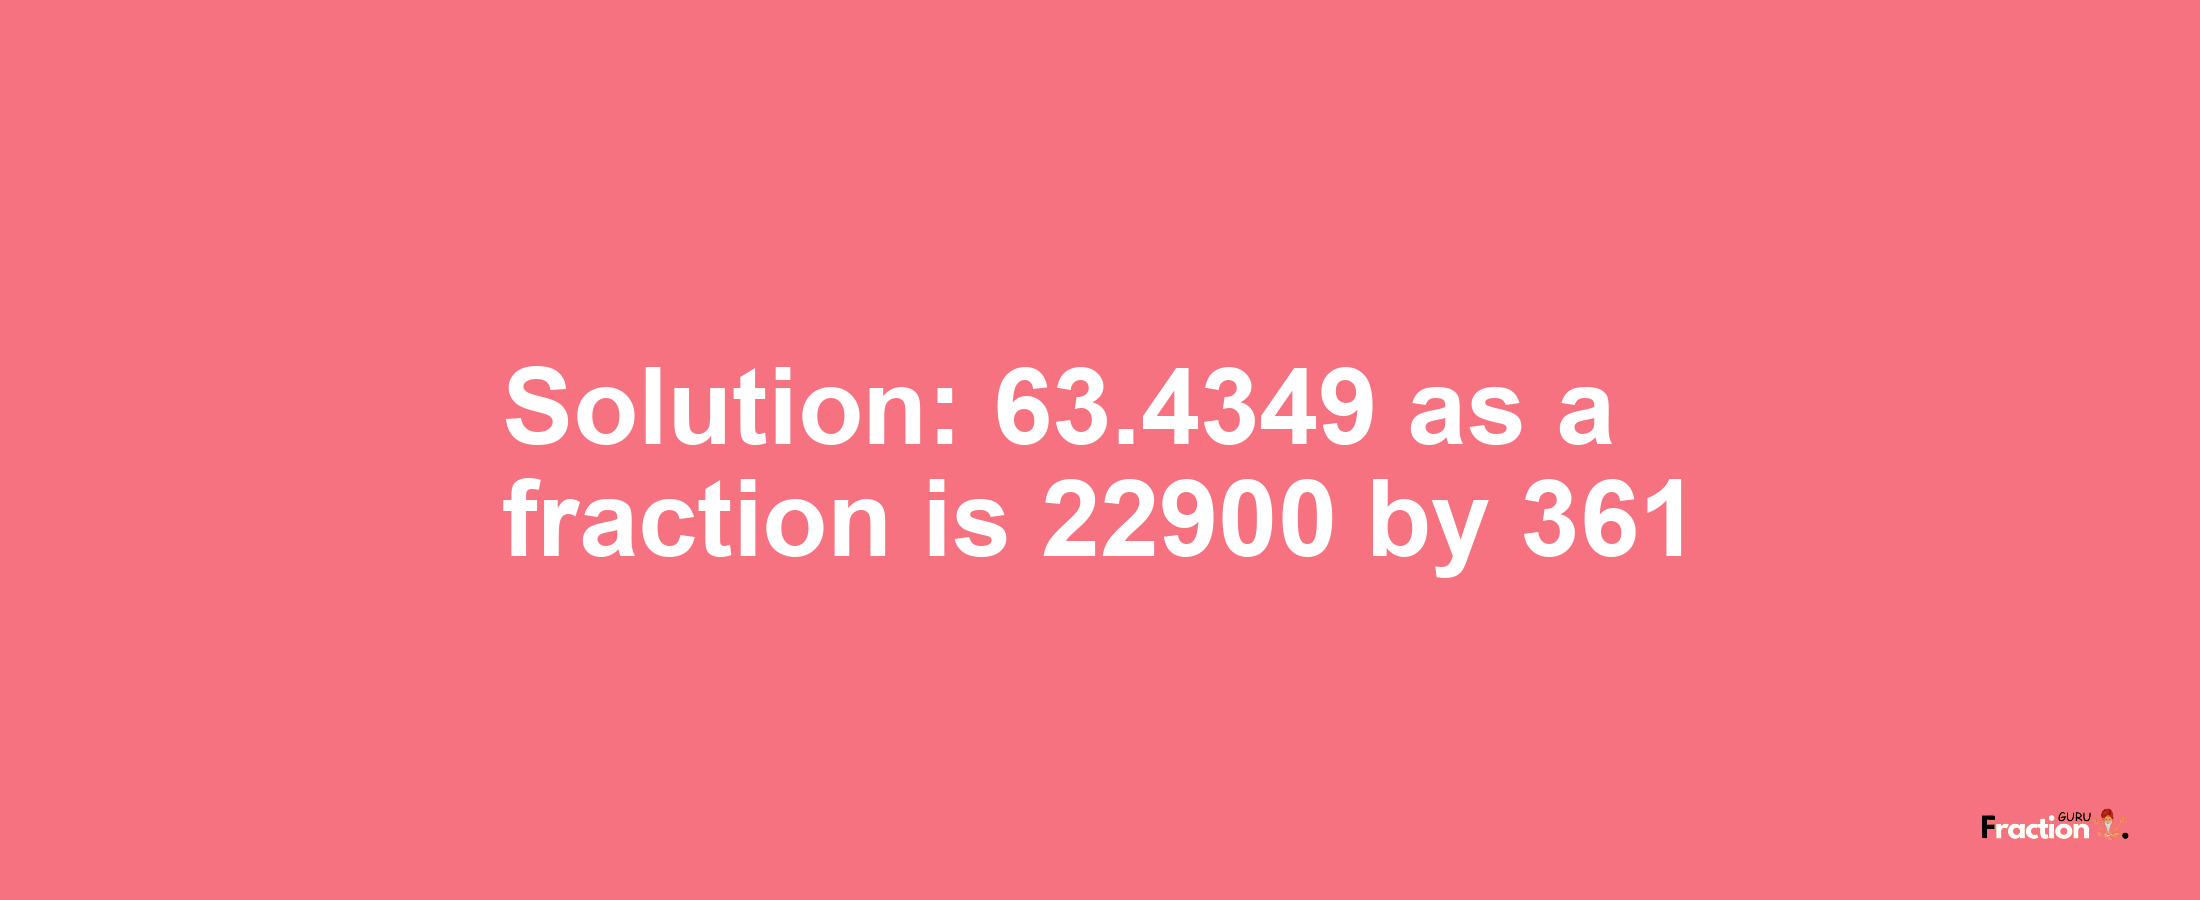 Solution:63.4349 as a fraction is 22900/361